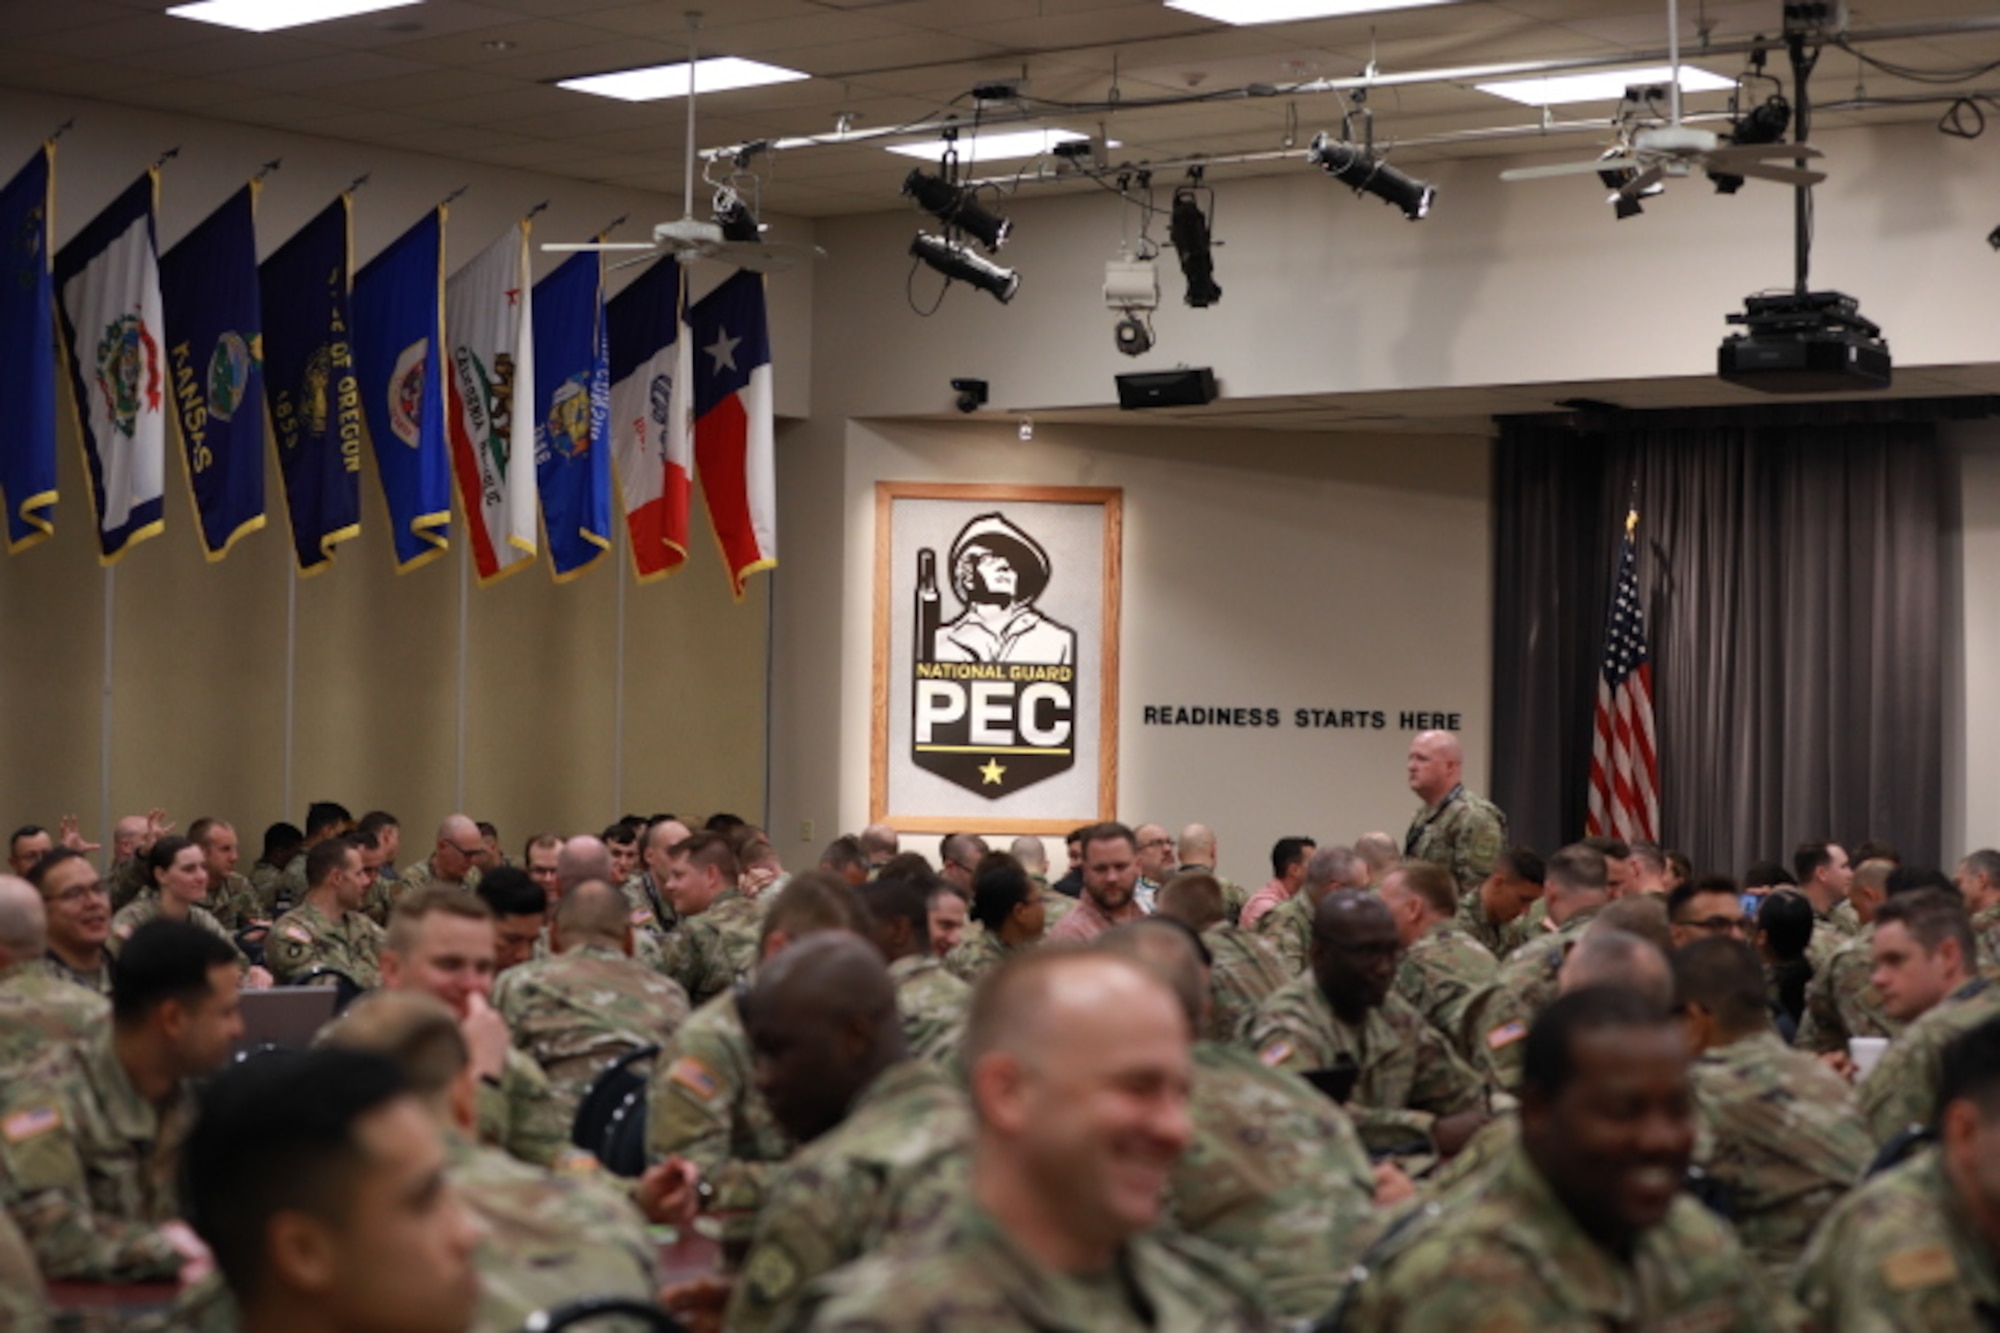 Approximately 800 National Guard and Army Reserve Soldiers, Airmen, Sailors, and civilian cyber professionals from around the world gather during this year’s Cyber Shield Training exercise.